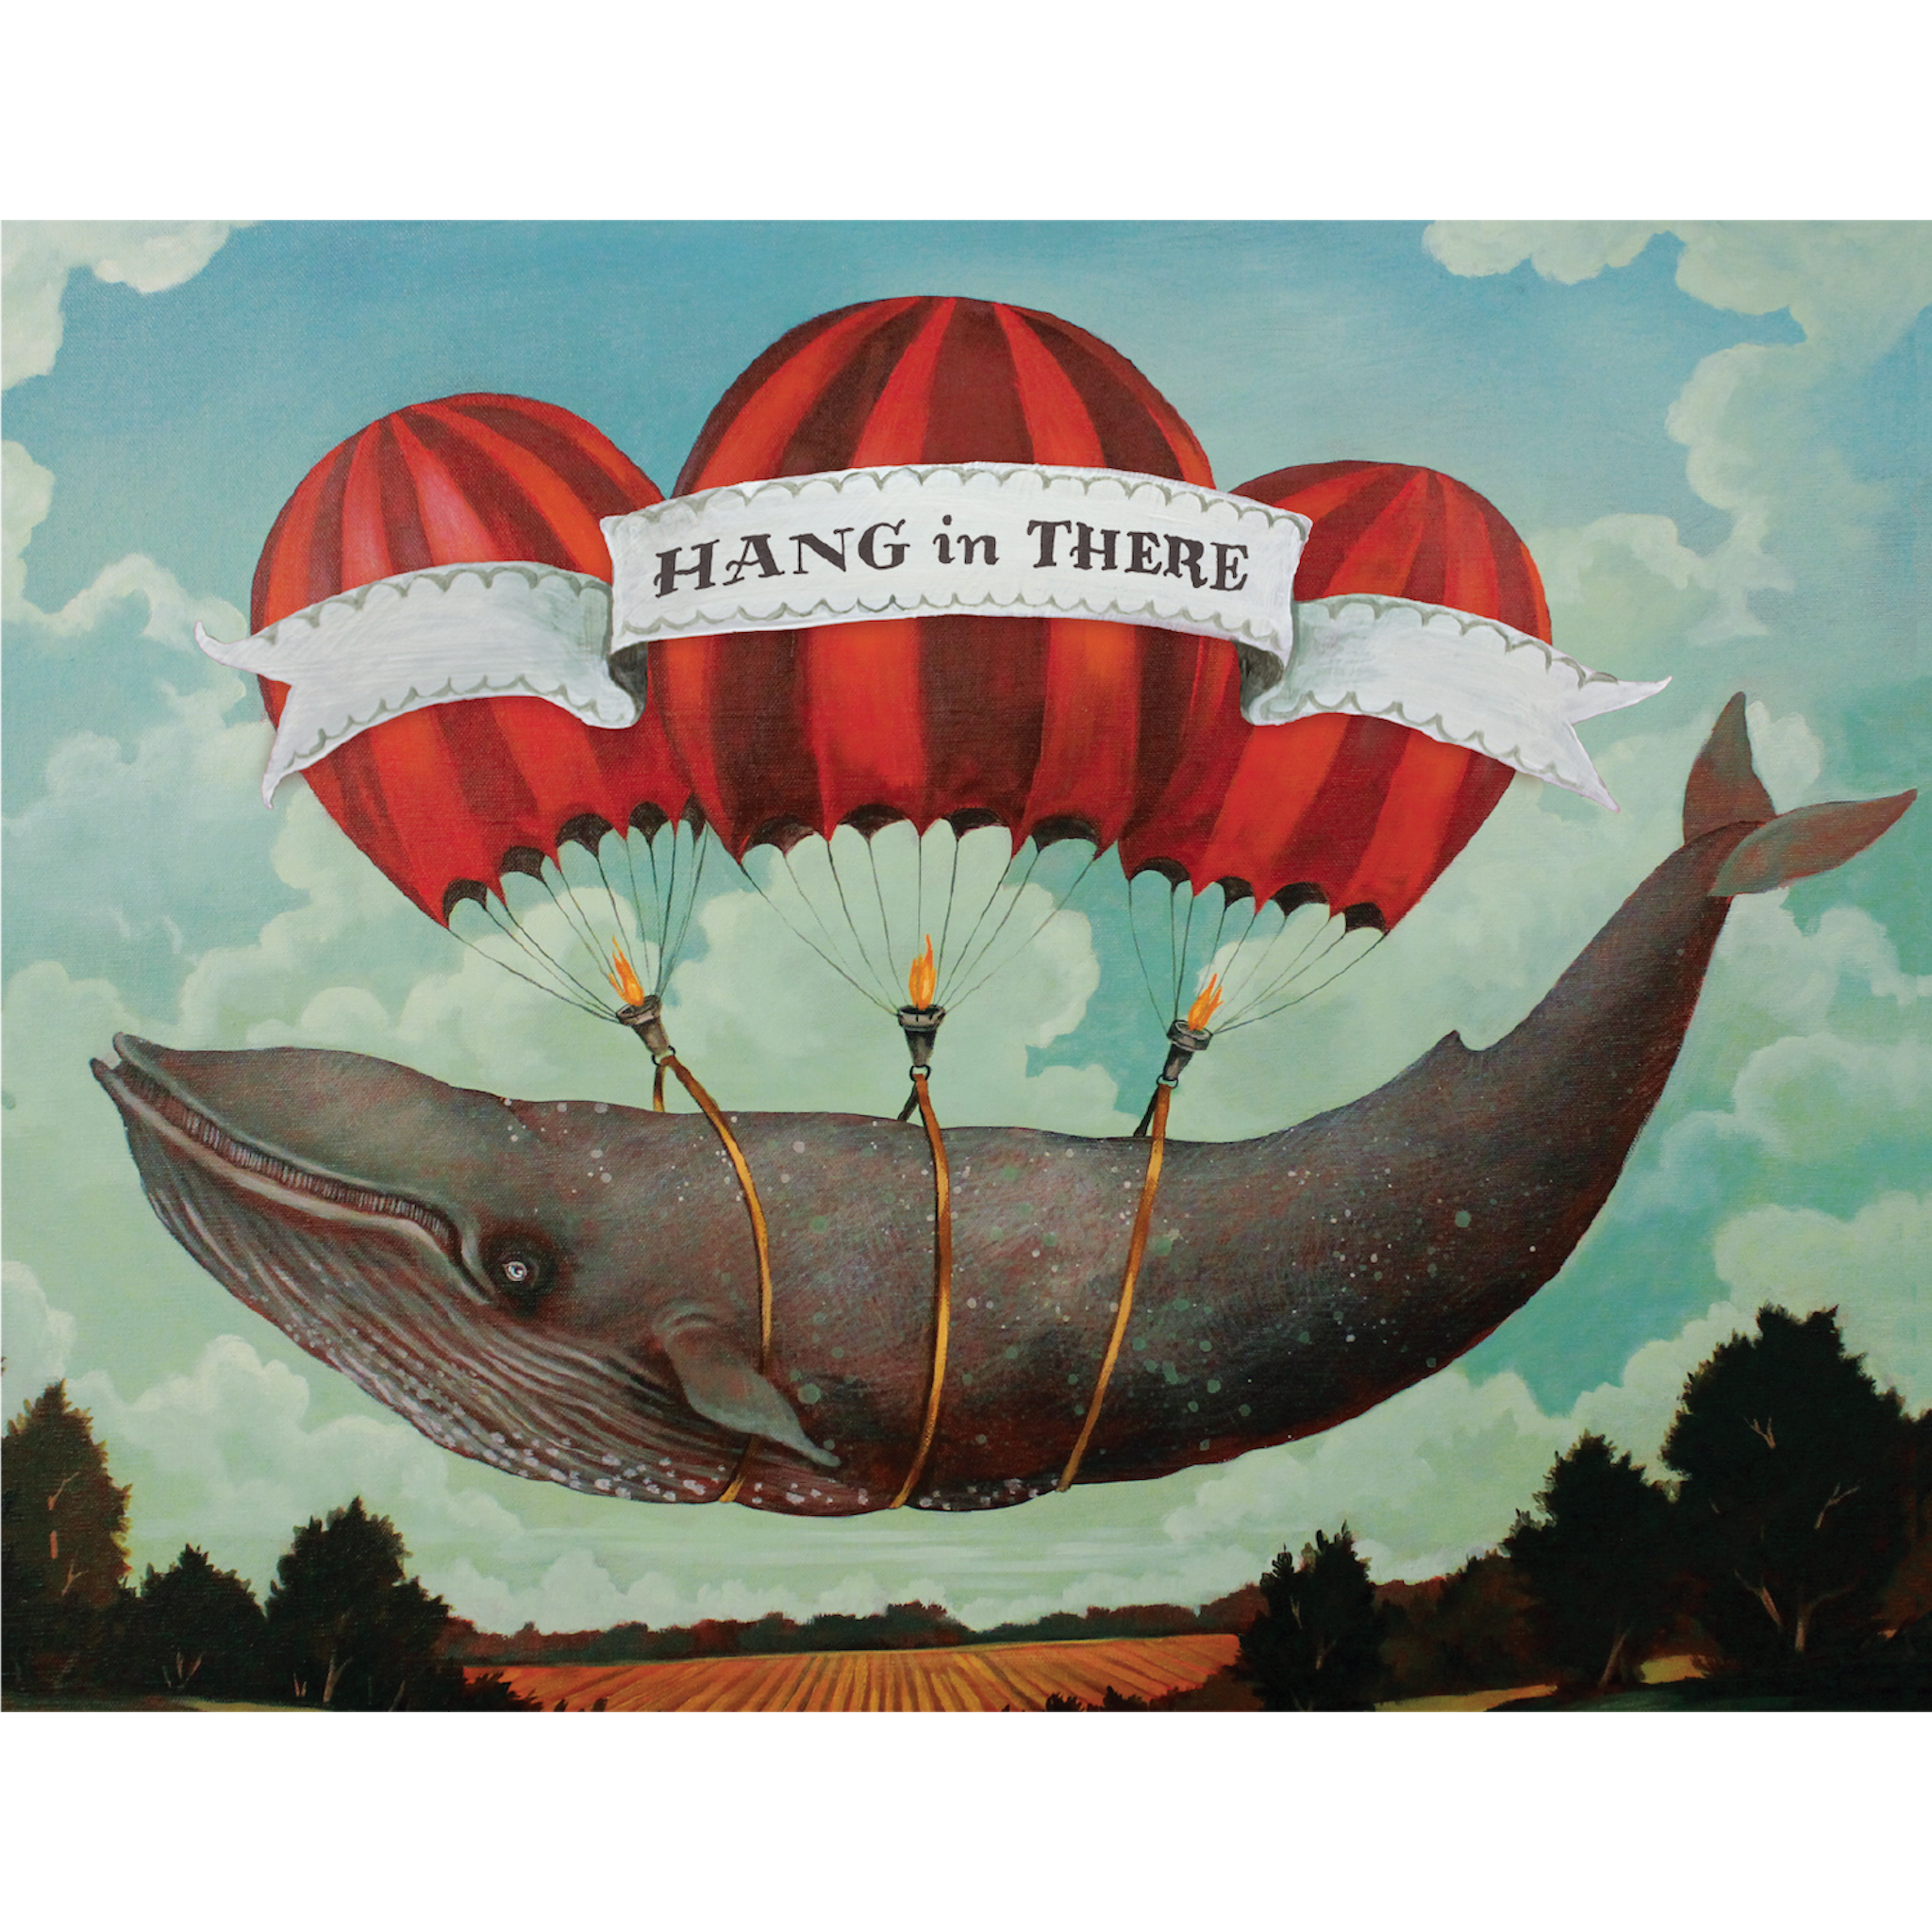 A whimsical illustration of a gray whale sailing through the cloudy blue sky by three red hot air balloons tied around its body, with a white banner reading &quot;HANG IN THERE&quot; flowing in front of the balloons.